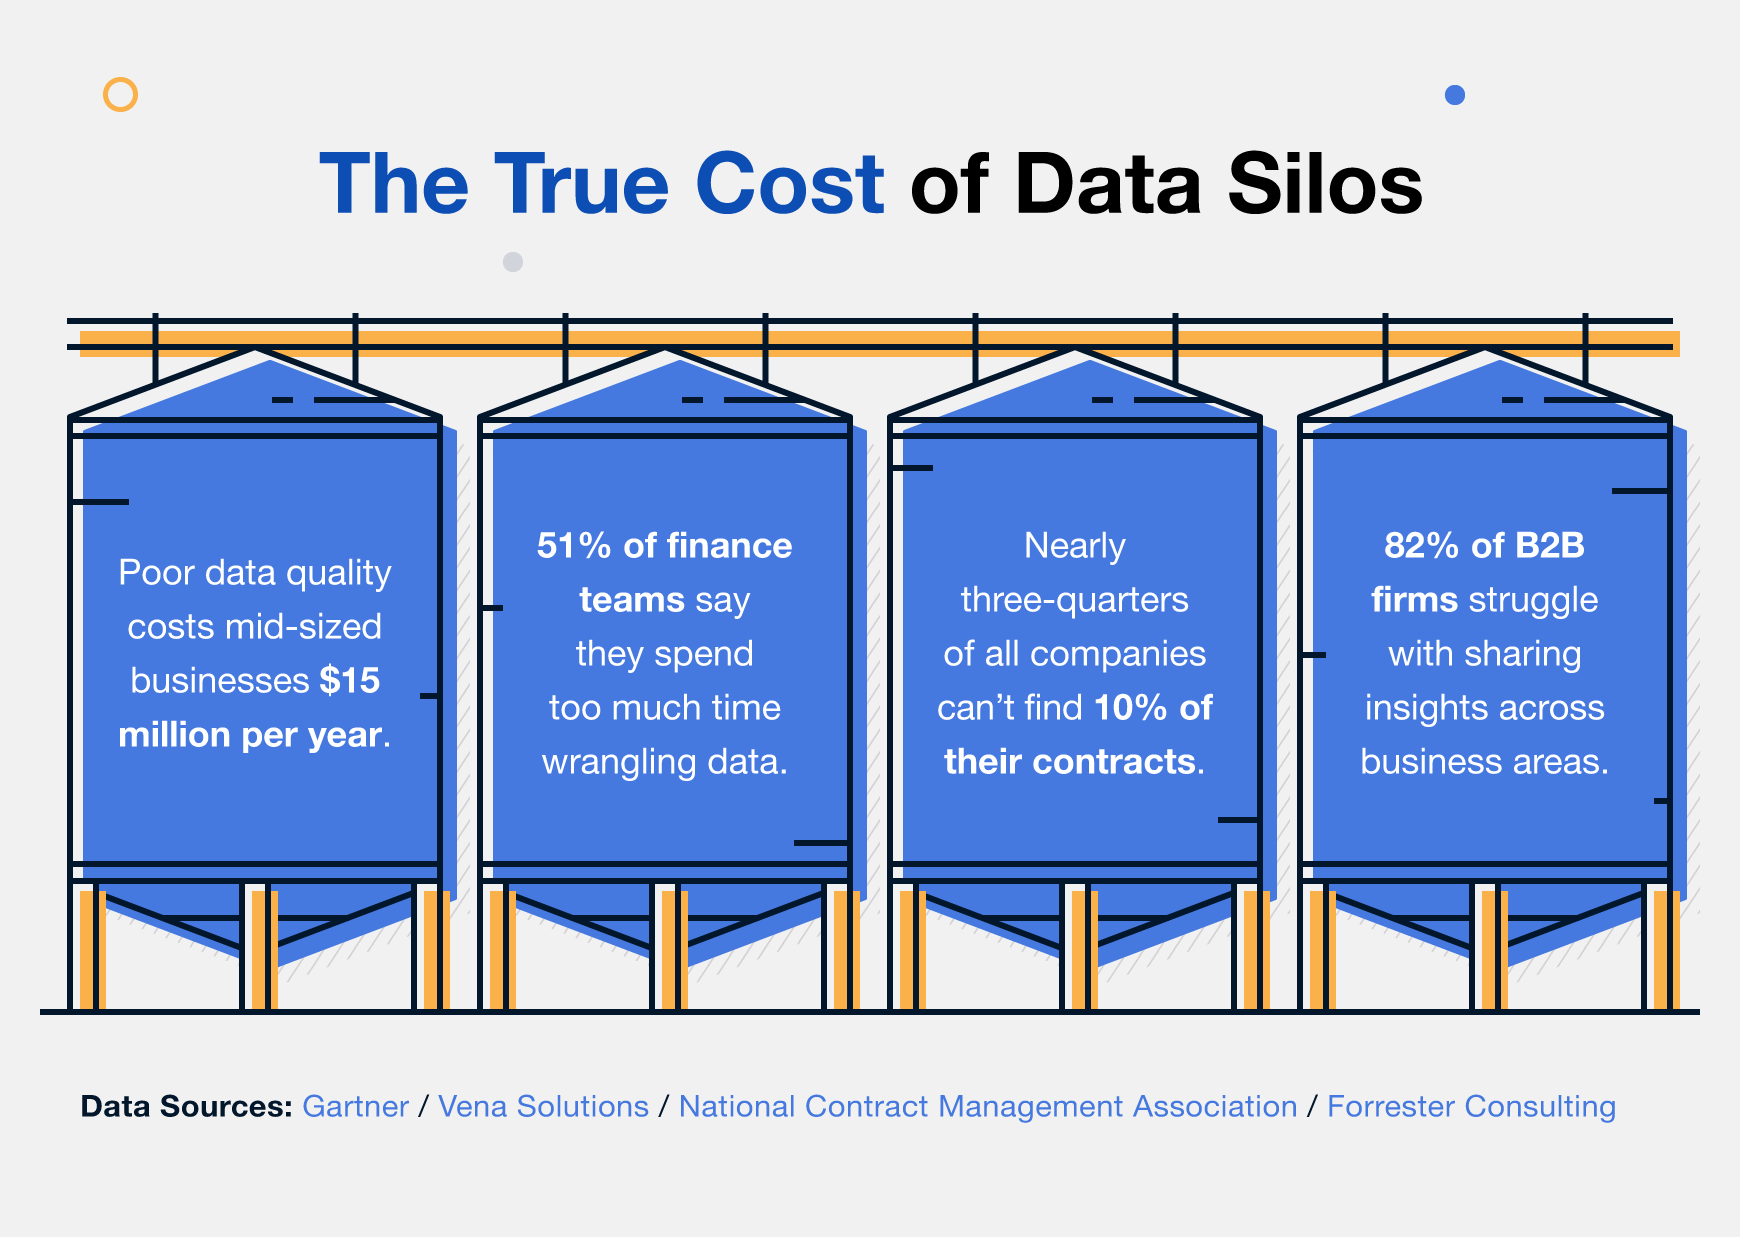 The cost of data siloes